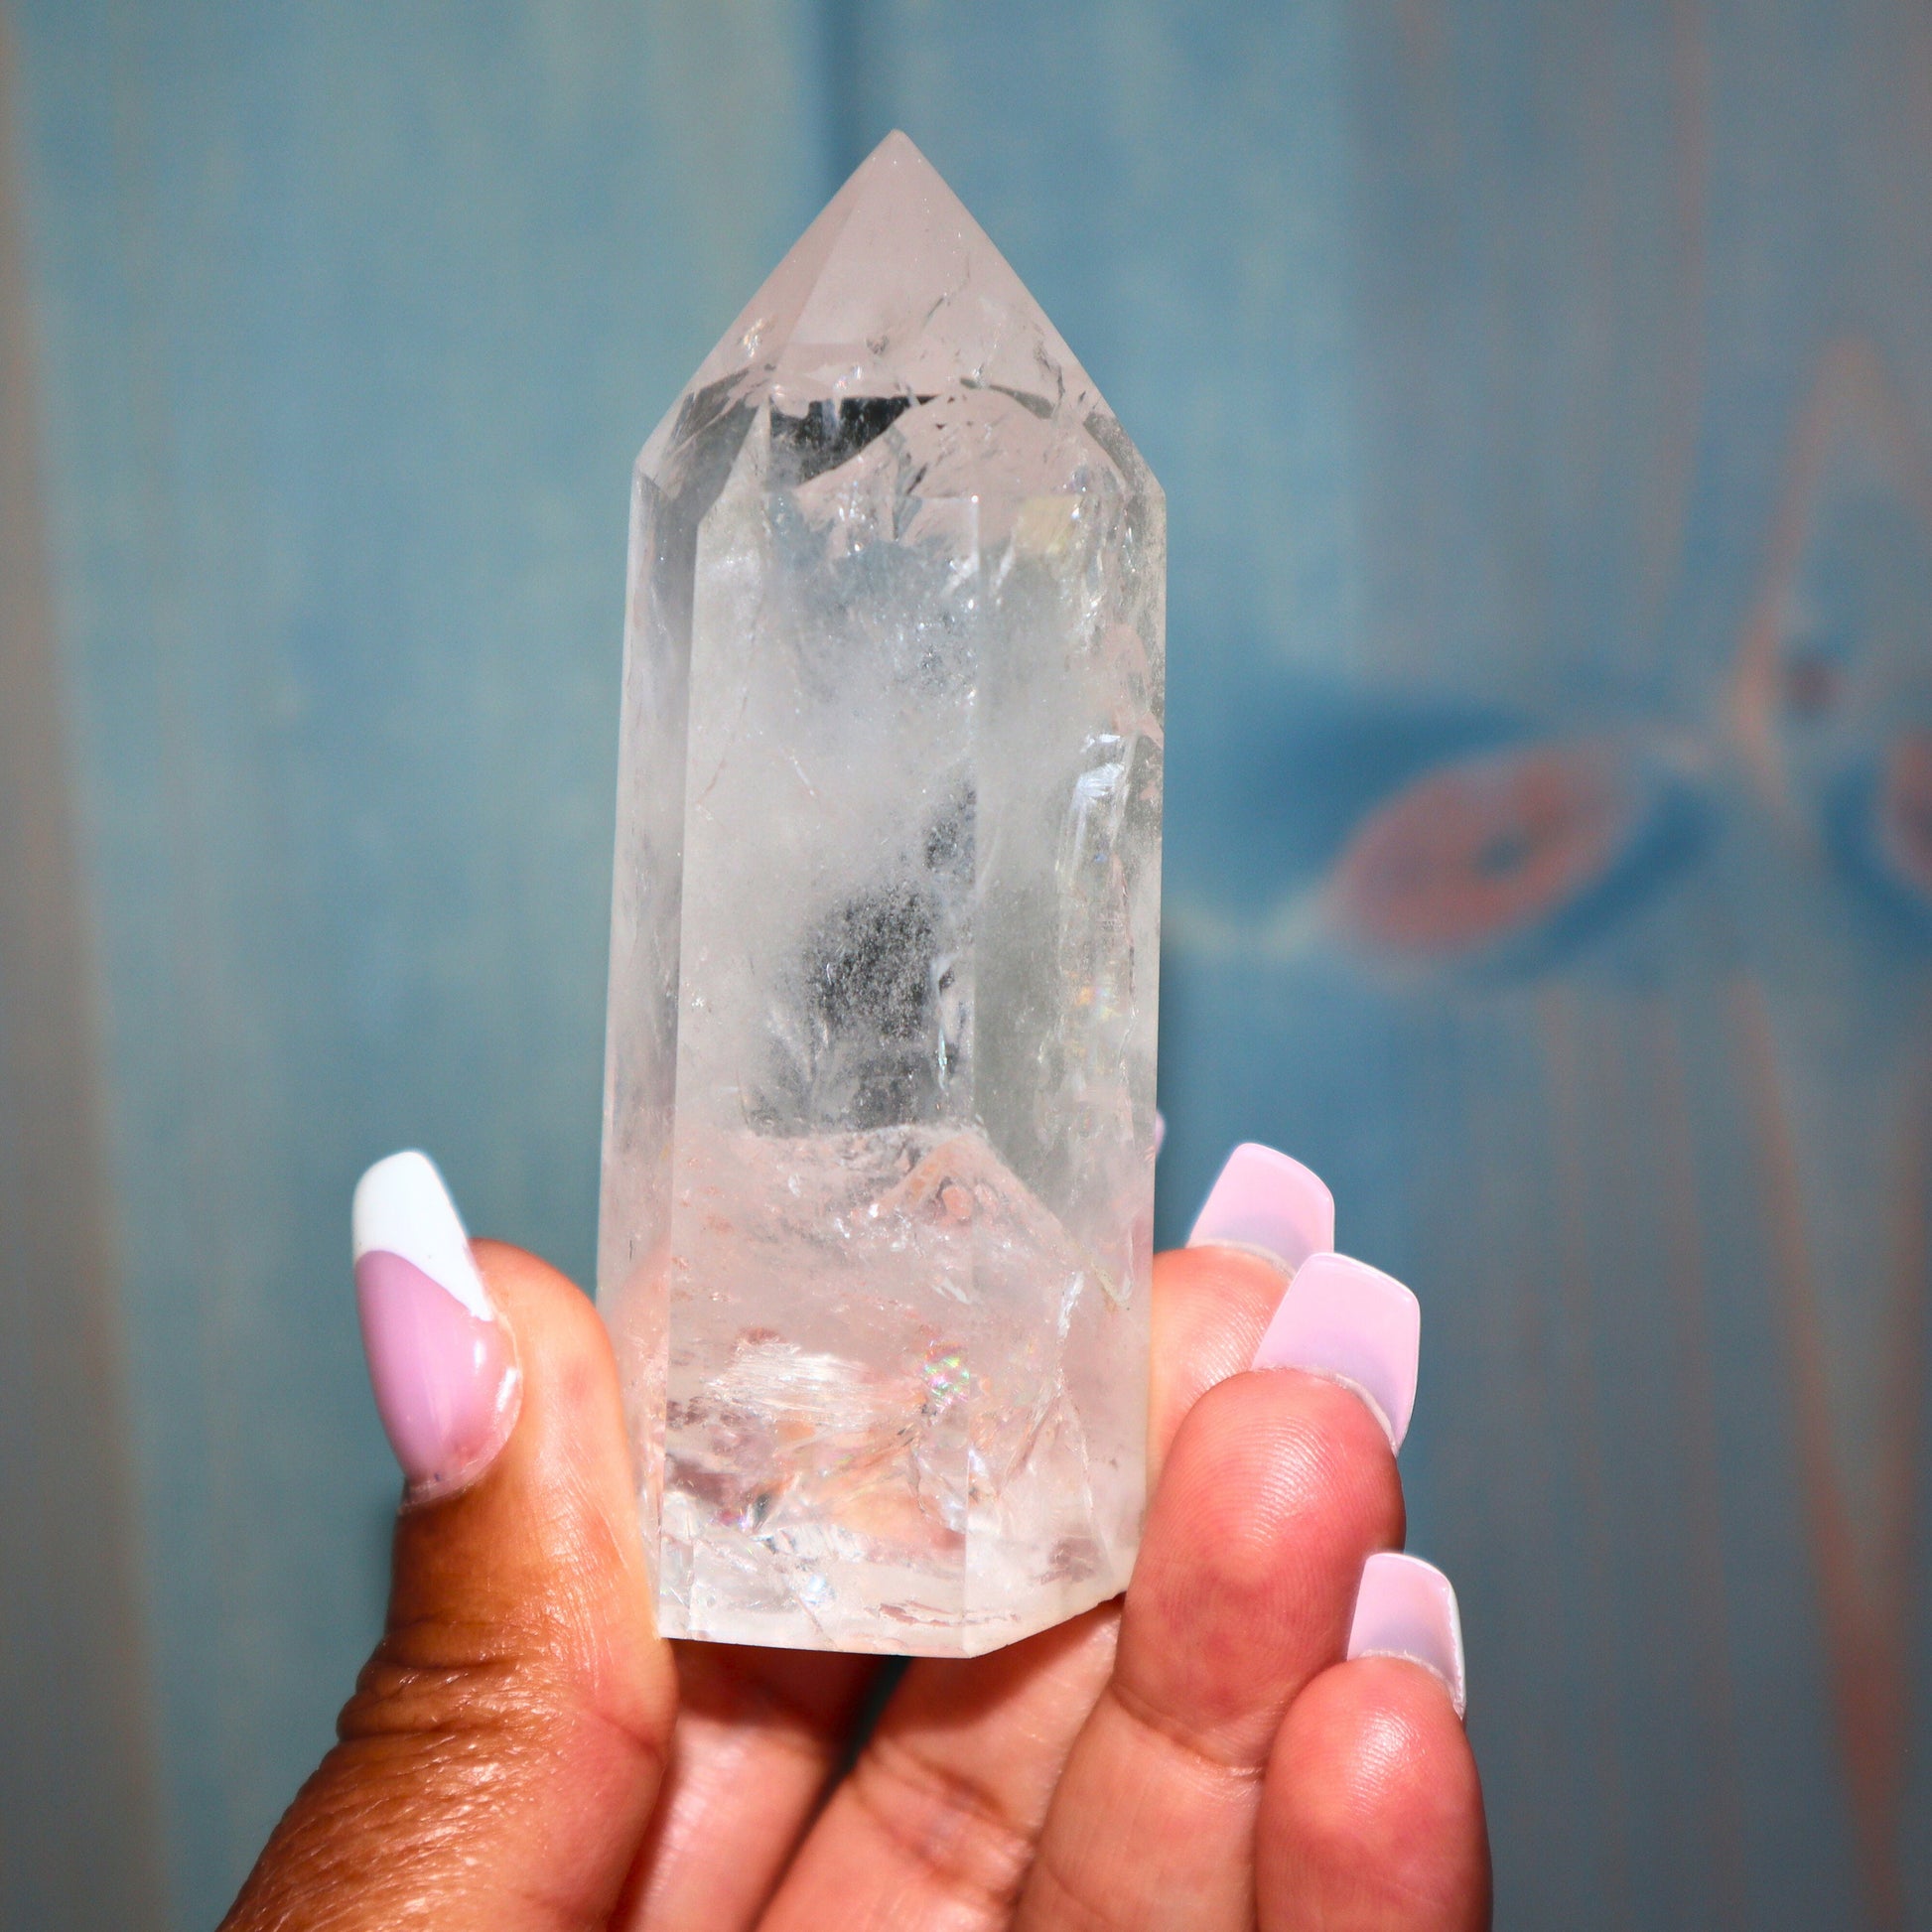 Clear Quartz Tower, Clear Quartz Crystal, Clear Point, Healing Crystals, Natural Crystals, Sacred Crystal Tower, Metaphysical Treasures